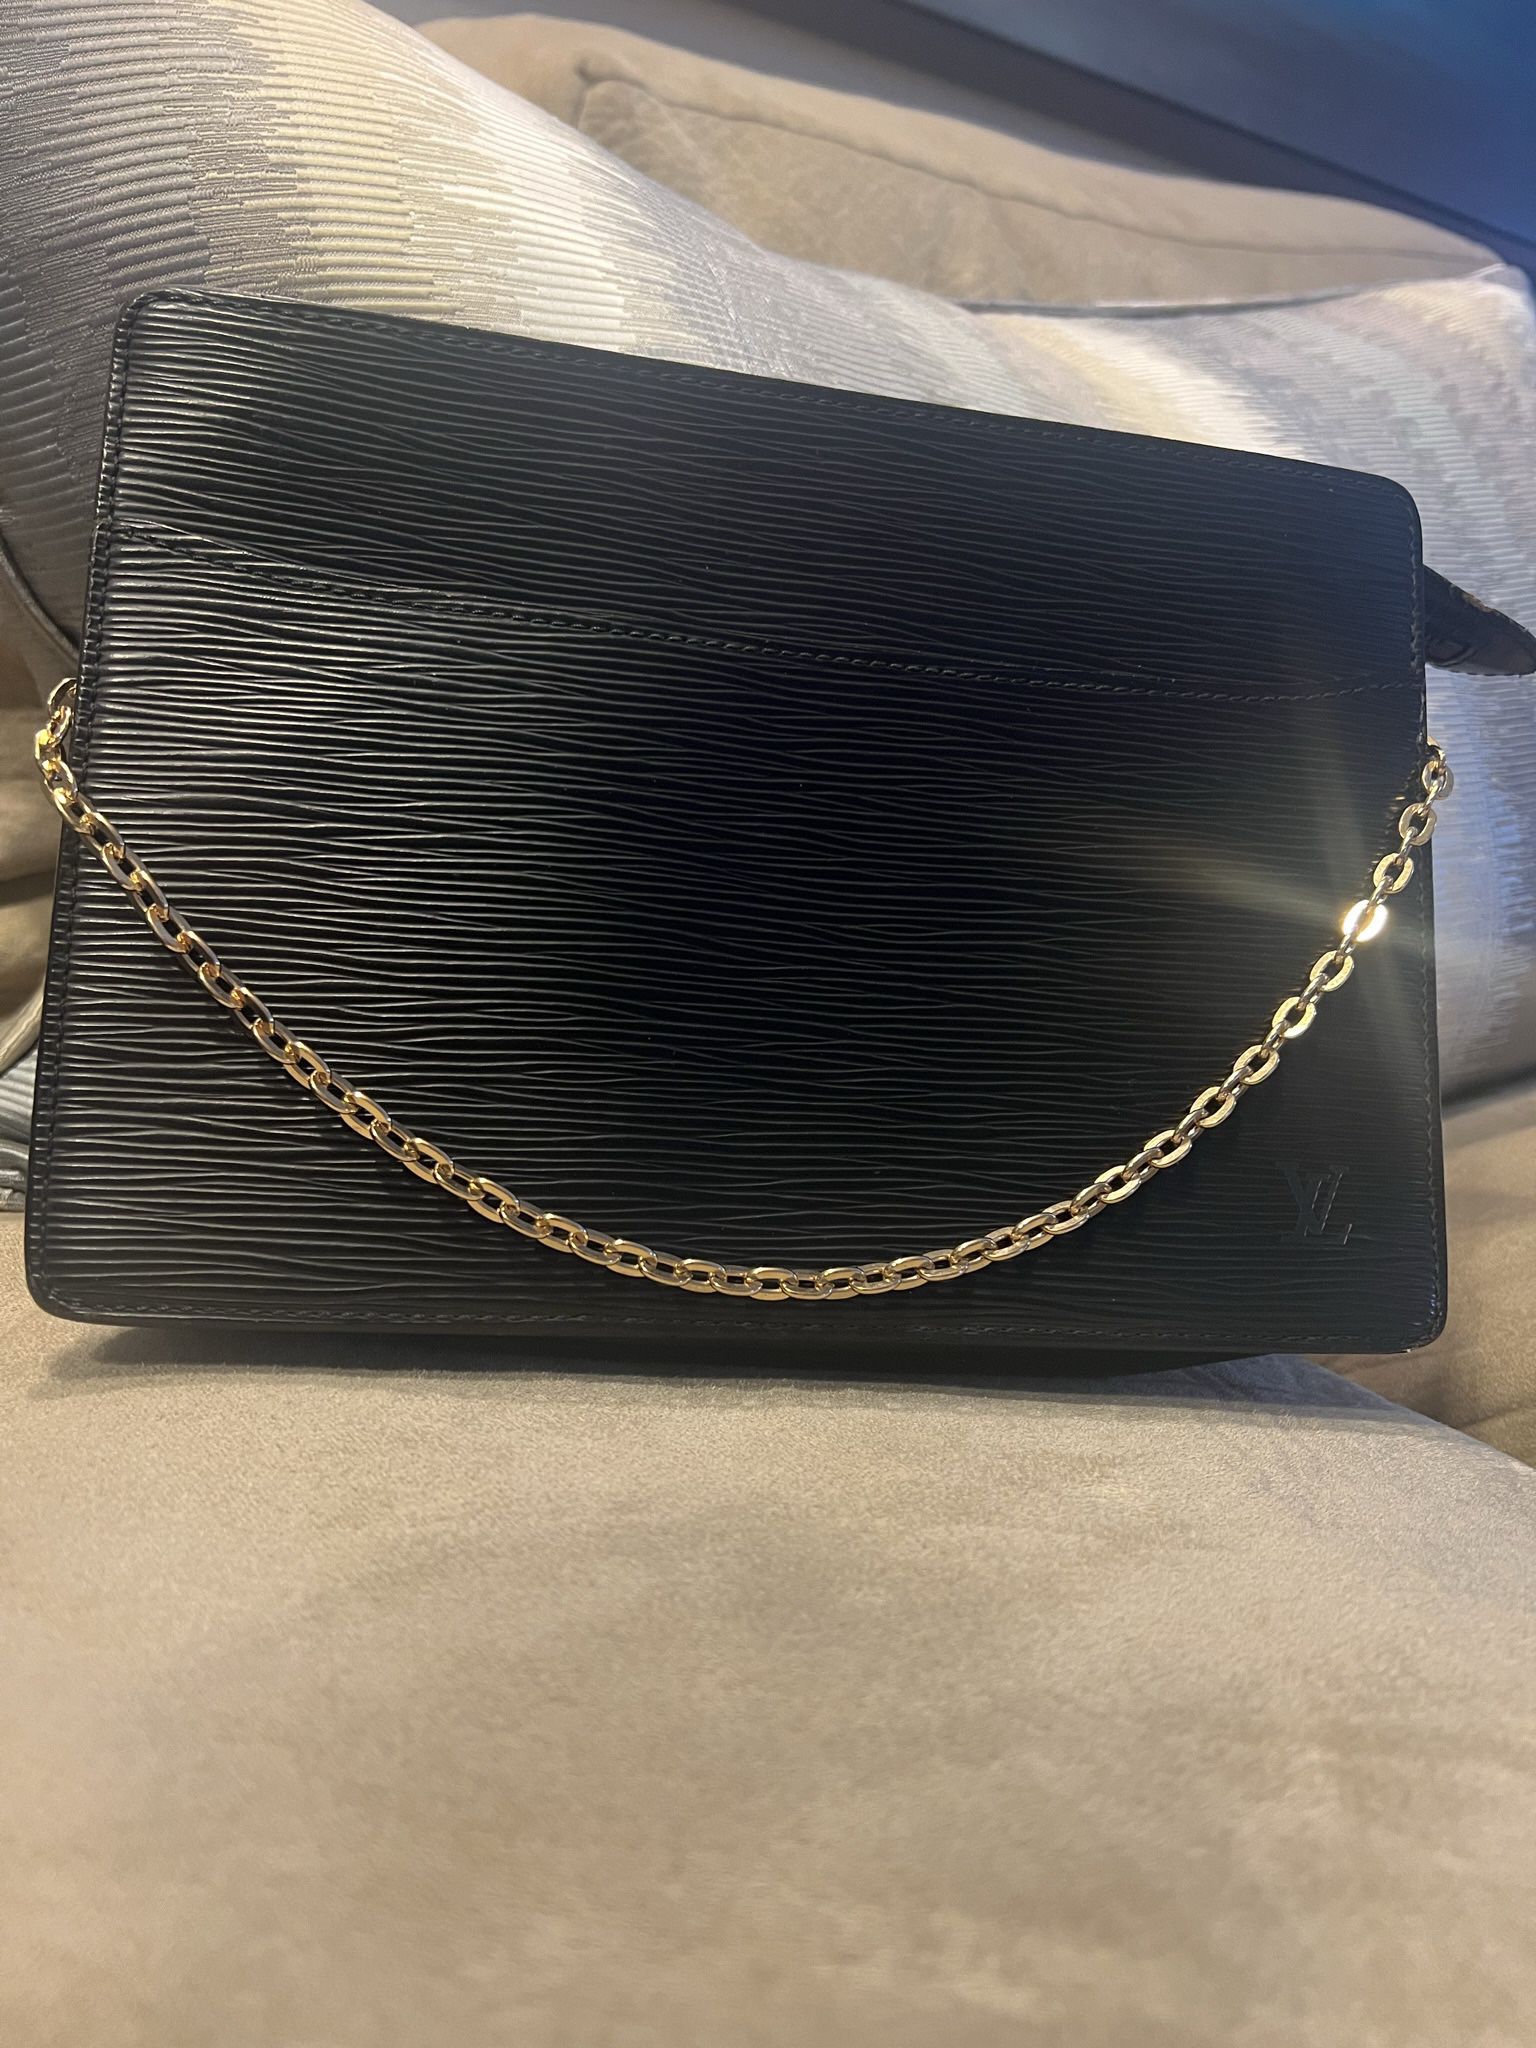 Louis Vuitton Discovery Backpack and Kasai Clutch for Sale in Phoenix, AZ -  OfferUp